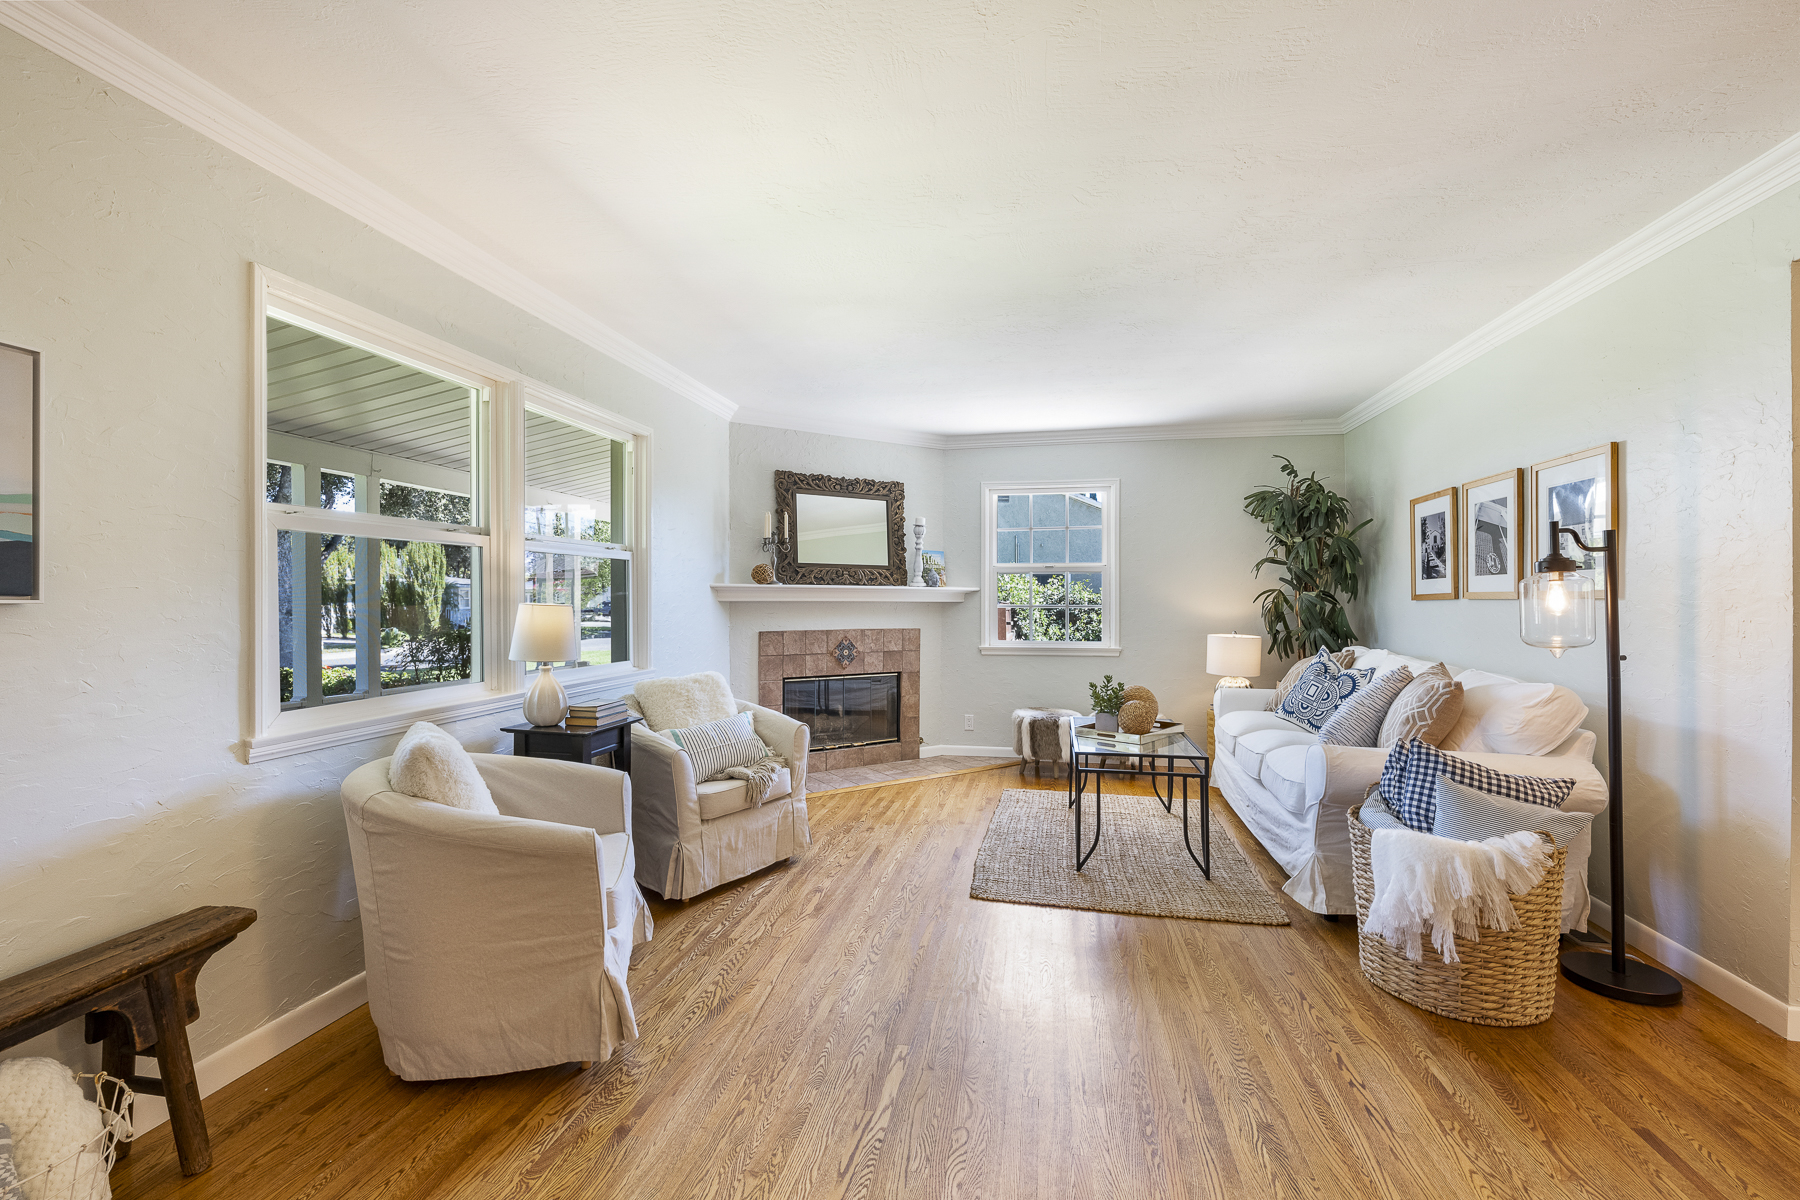 411 Truman Ave, Fullerton, CA 92832: Living Room with fireplace and exterior windows.